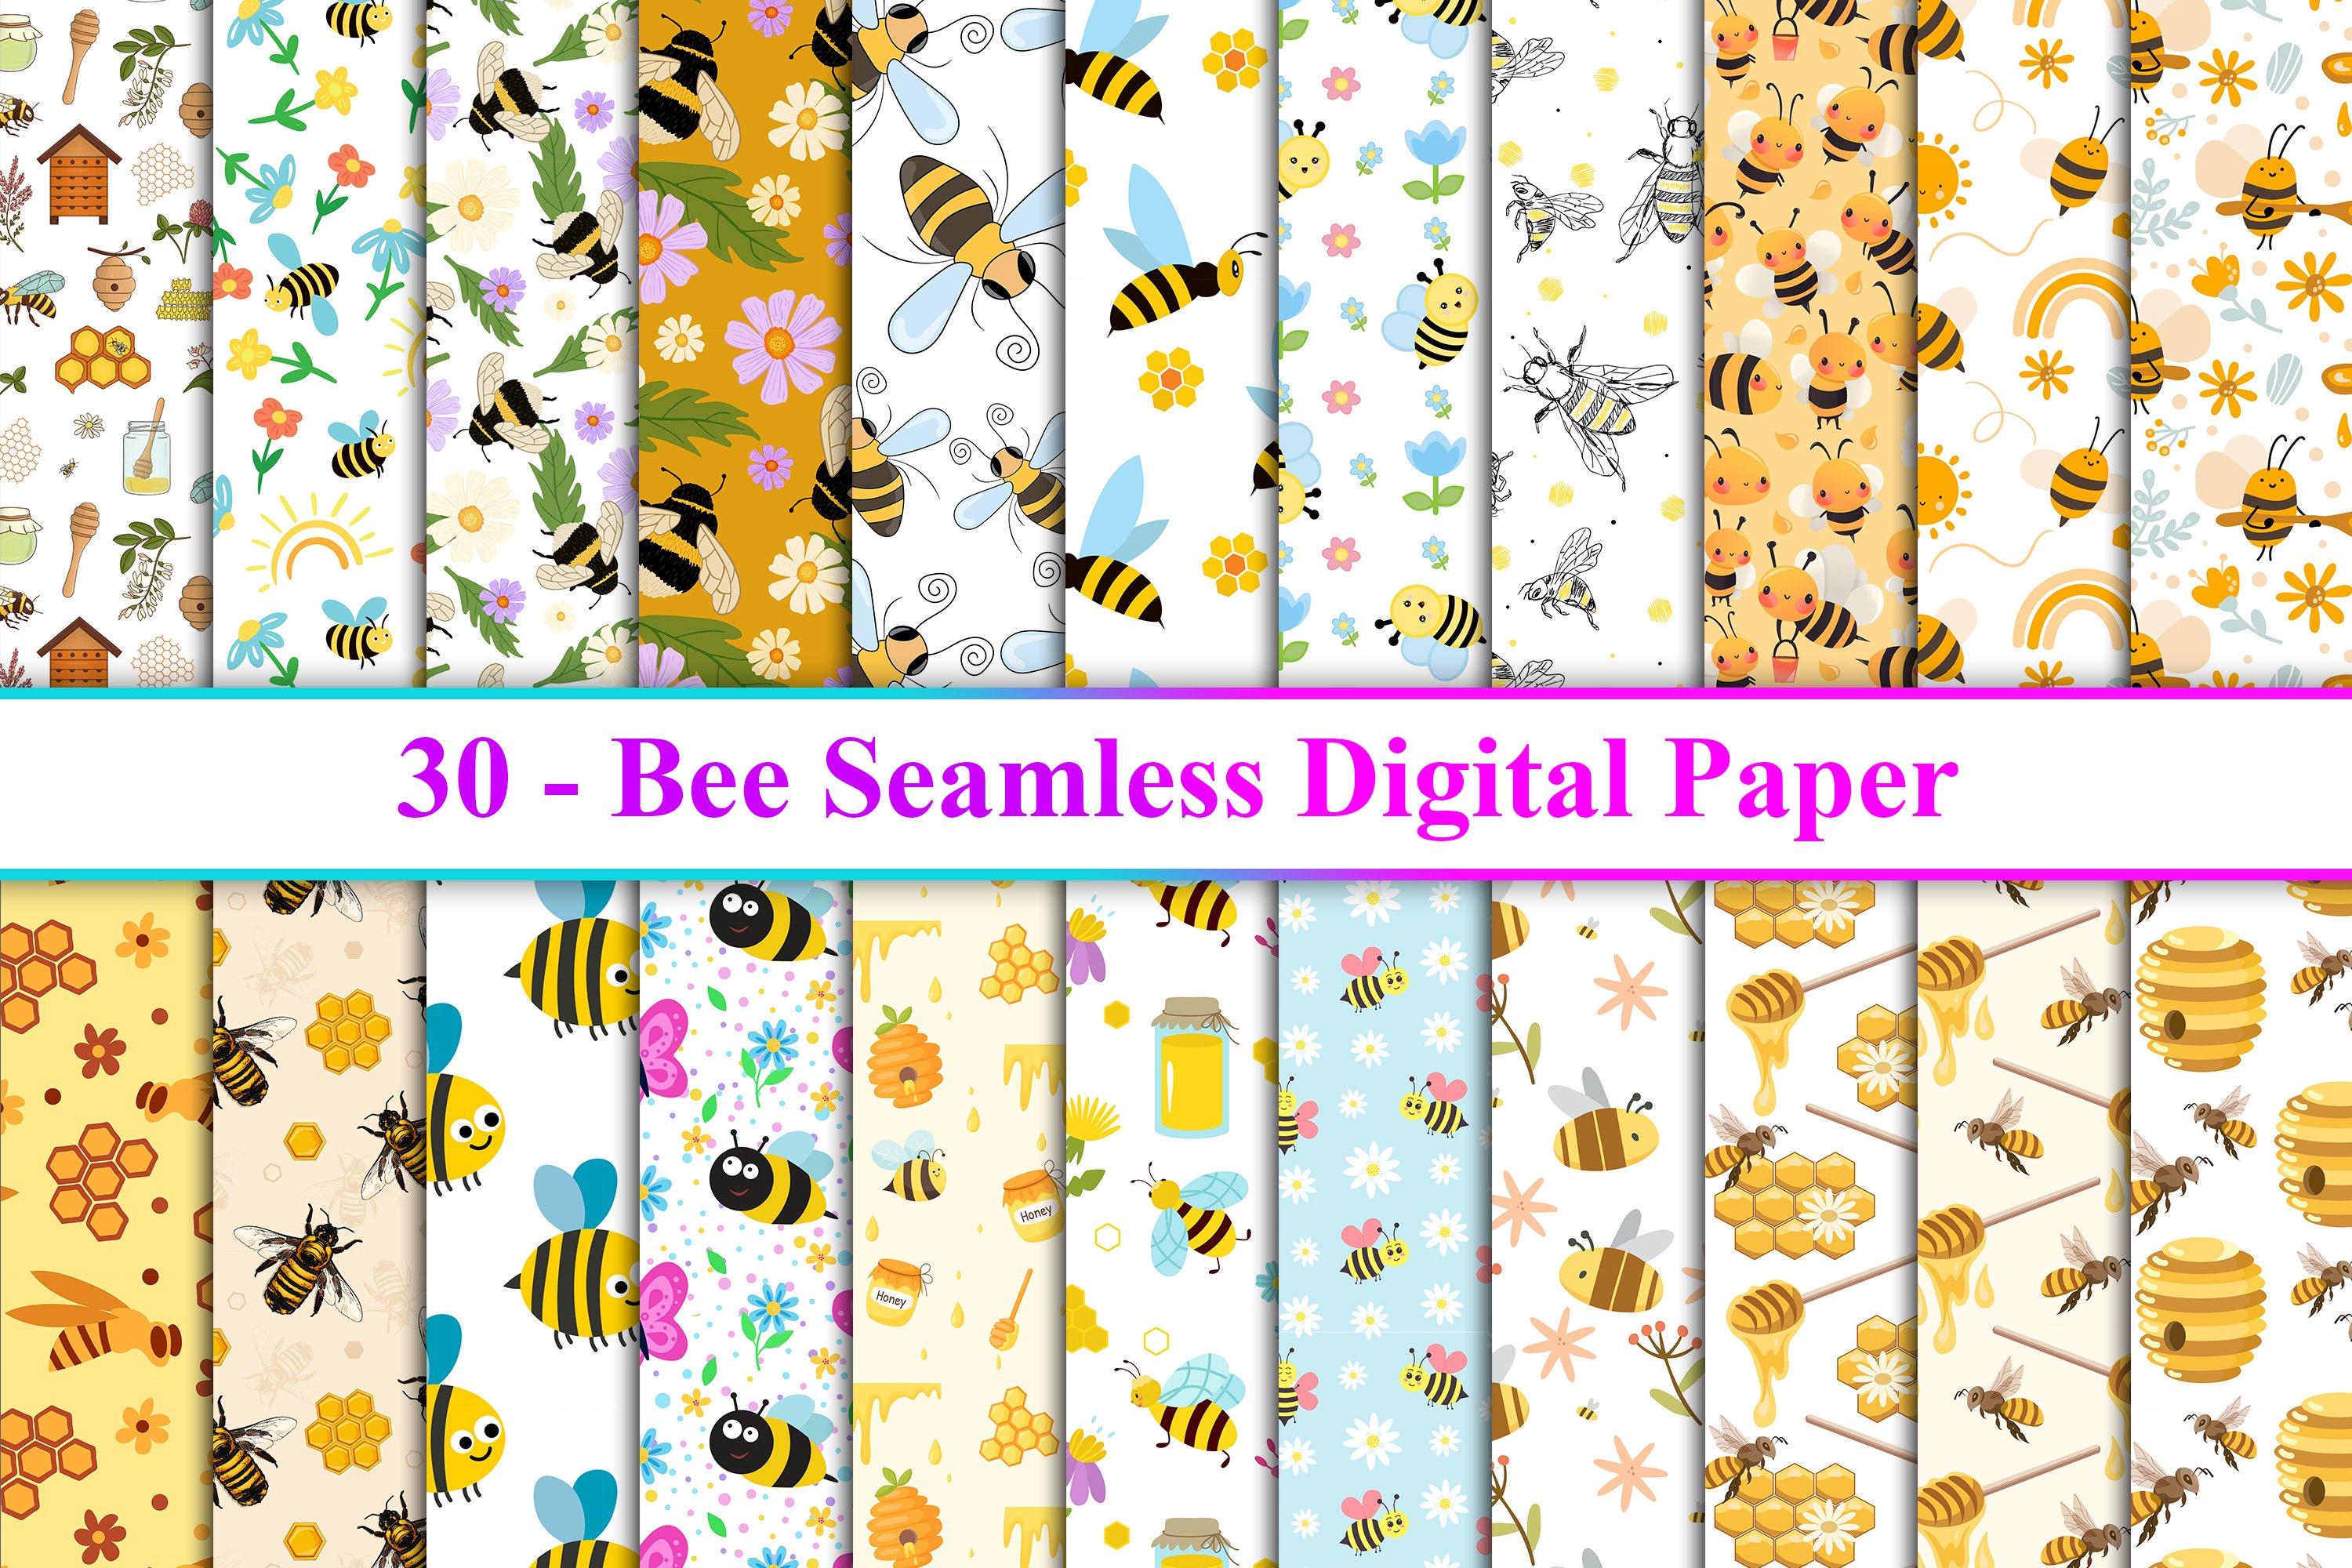 Bee Seamless Pattern cover image.